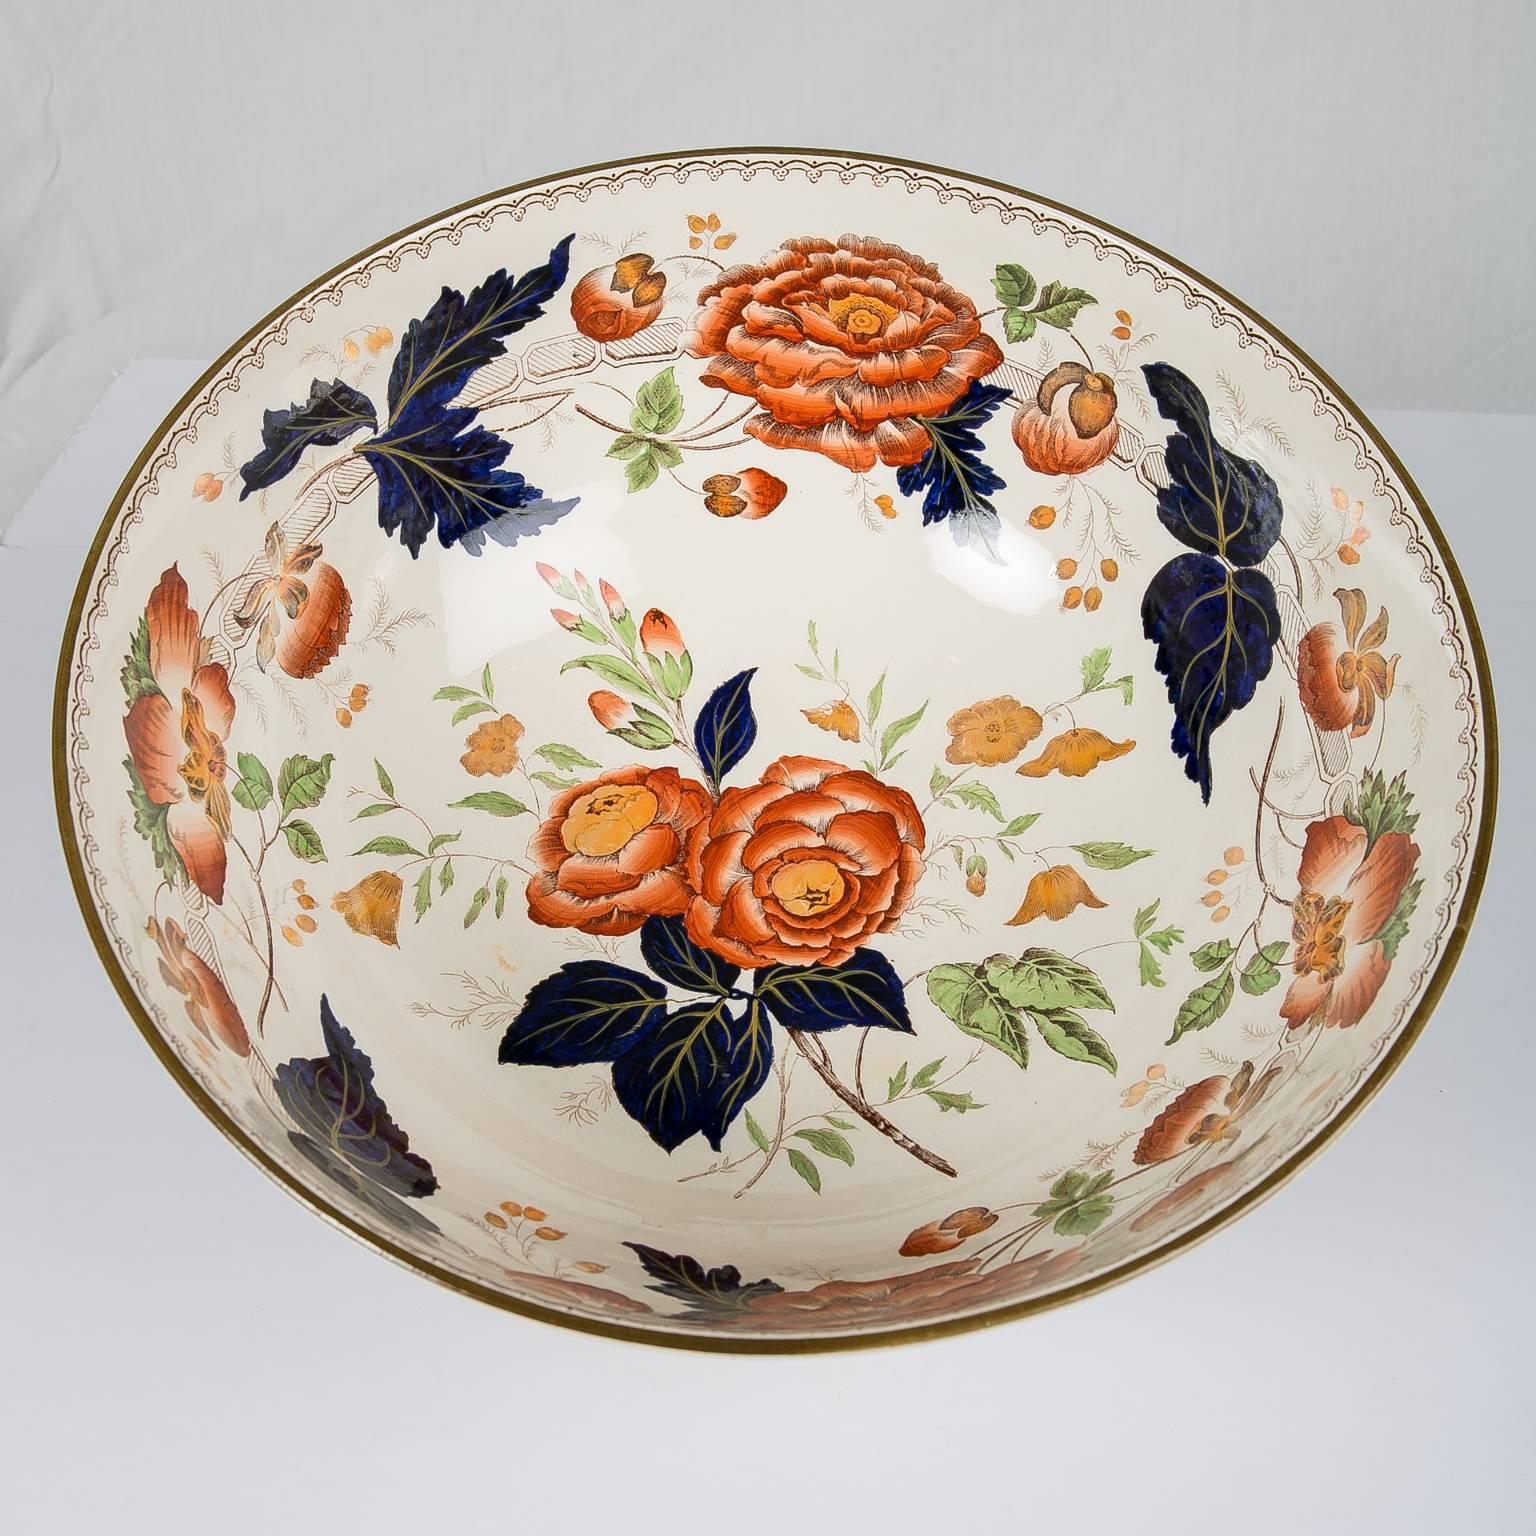 A large Wedgwood punch bowl decorated with orange peonies, and blue and green leaves in the style of the Aesthetic movement. Made in England, circa 1880 the bowl follows one of the core tenets of the Aesthetic movement. It shows that decorative